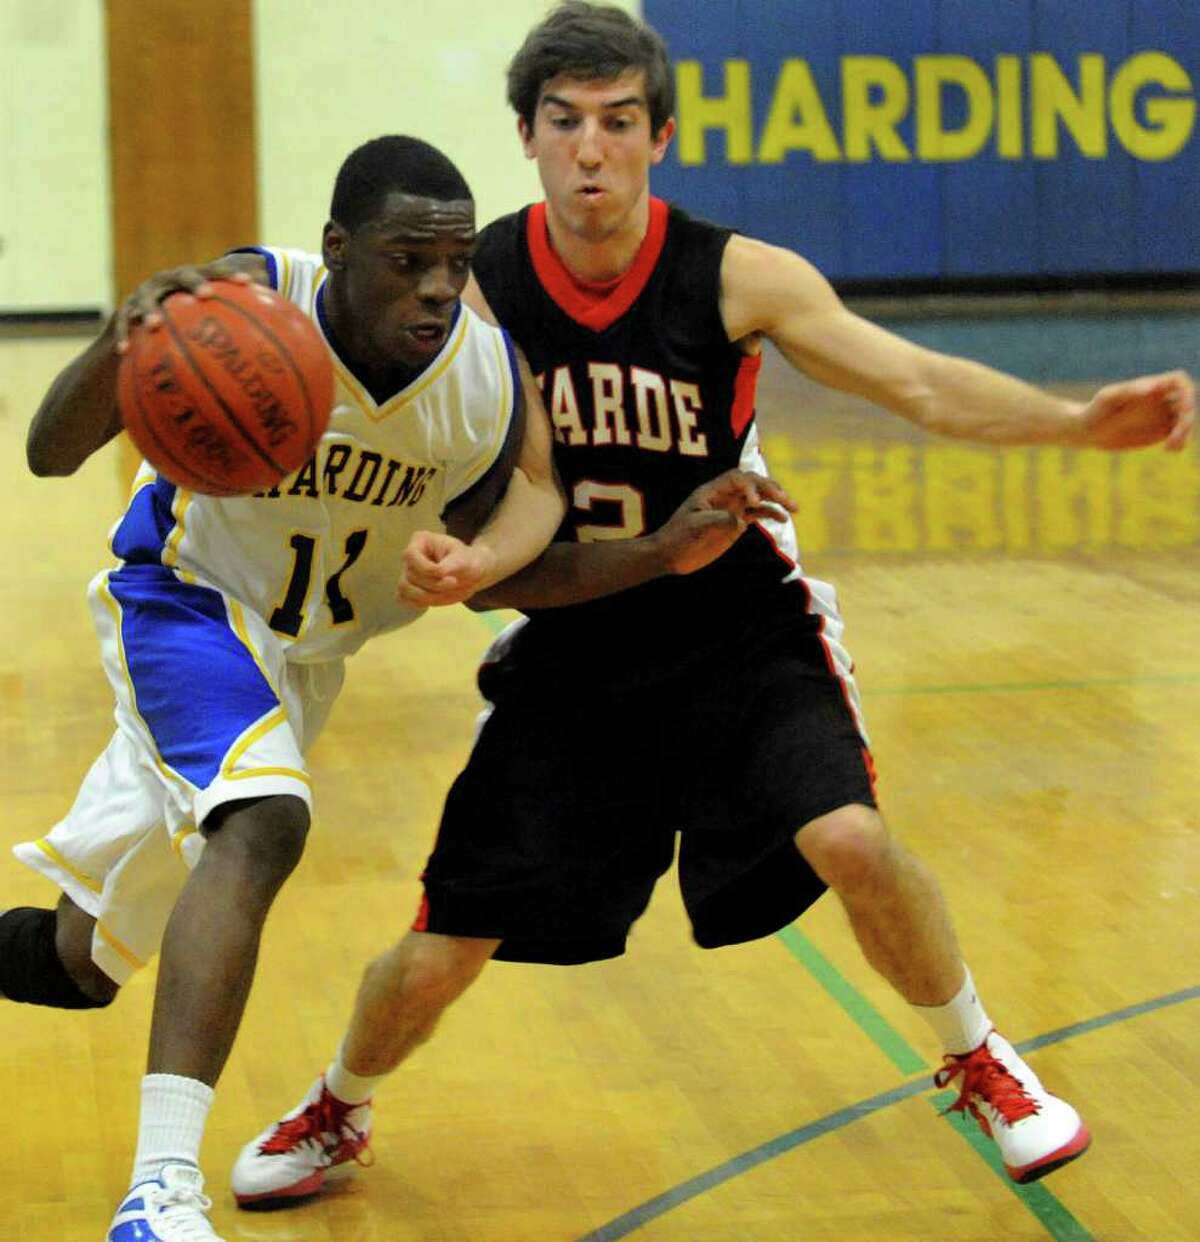 Harding's #11 Steven Walker, left, tries to get past Fairfield Warde's Matthew McTague, during boys basketball action in Bridgeport, Conn. on Tuesday January 3, 2011.